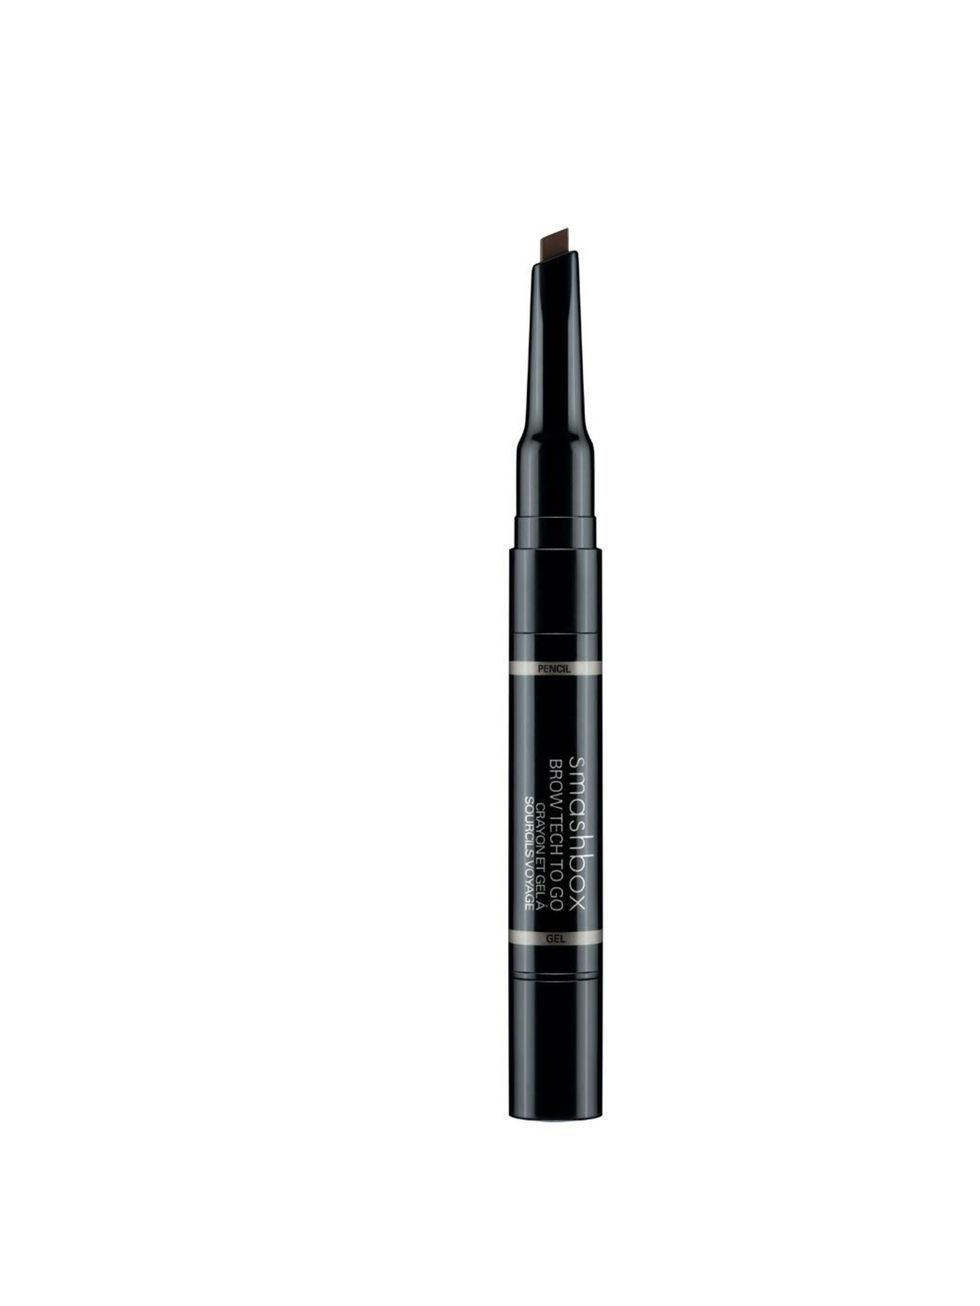 <p><a href="http://www.smashbox.co.uk/product/6026/17808/Eyes/Brows/BROW-TECH-TO-GO/Self-Healthy-Beauty-Award-2011/index.tmpl">Smashbox Brow Tech To Go, £19</a></p><p>Rihannas brows are contoured to perfection. This double-ended pencil has a waterproof a